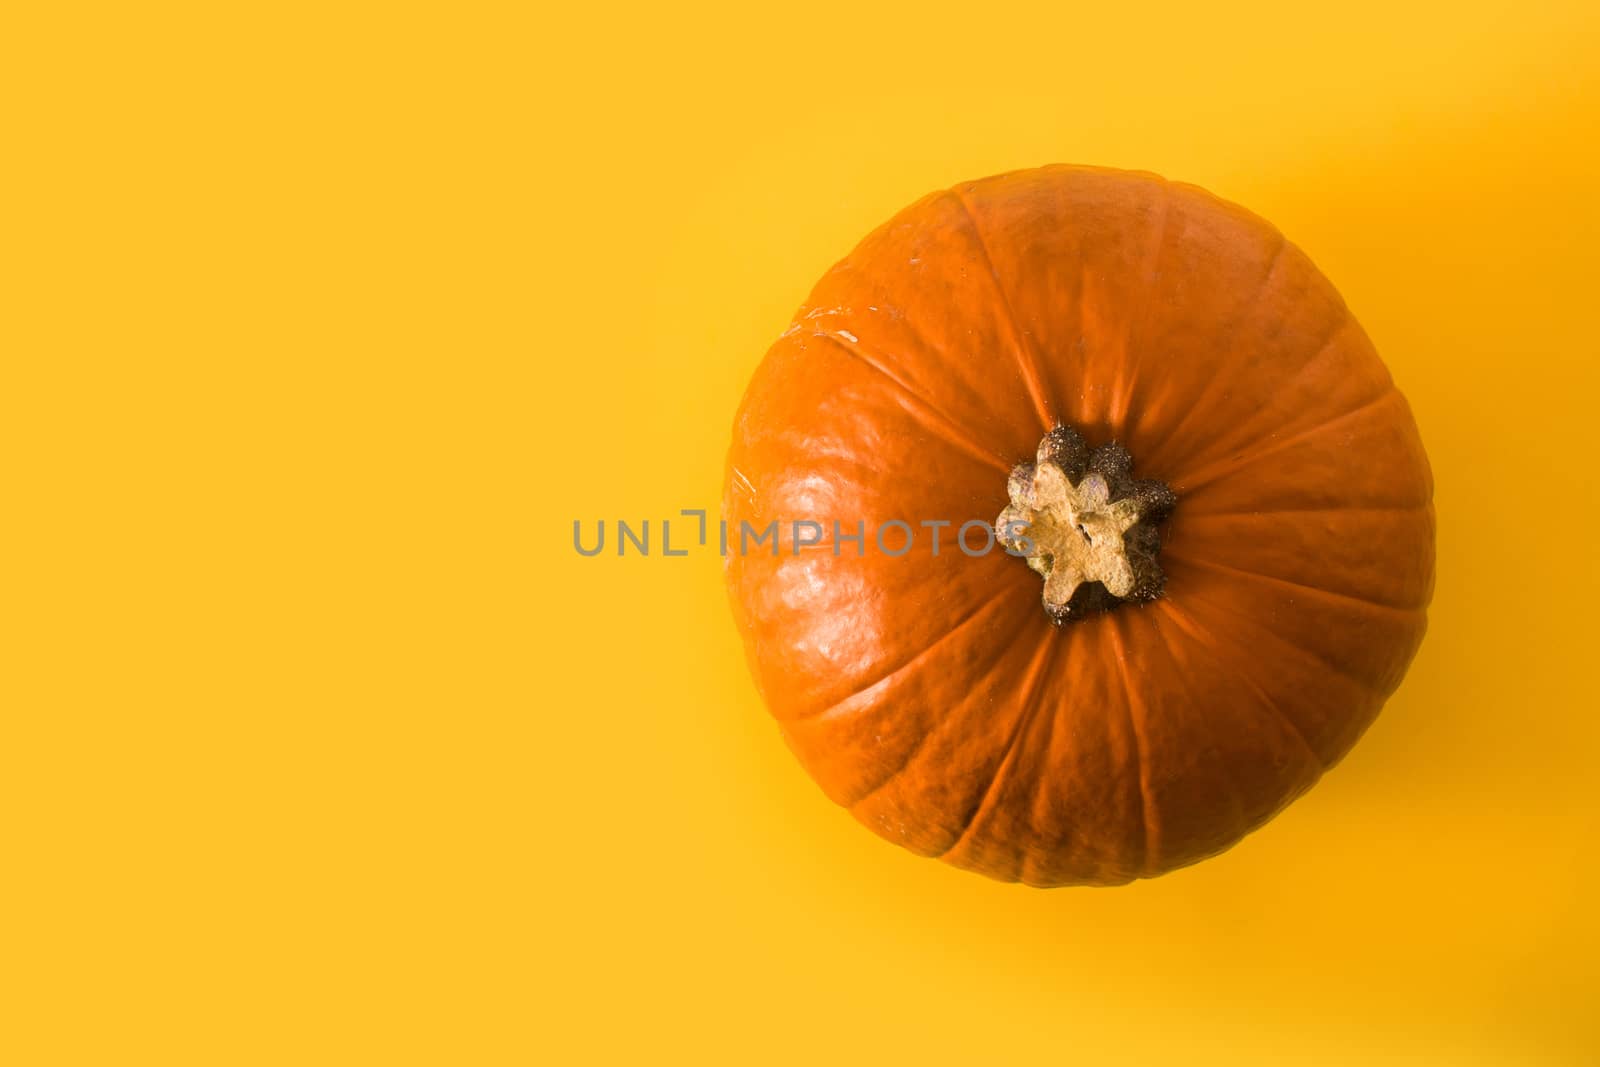 Pumpkin on yellow background by chandlervid85